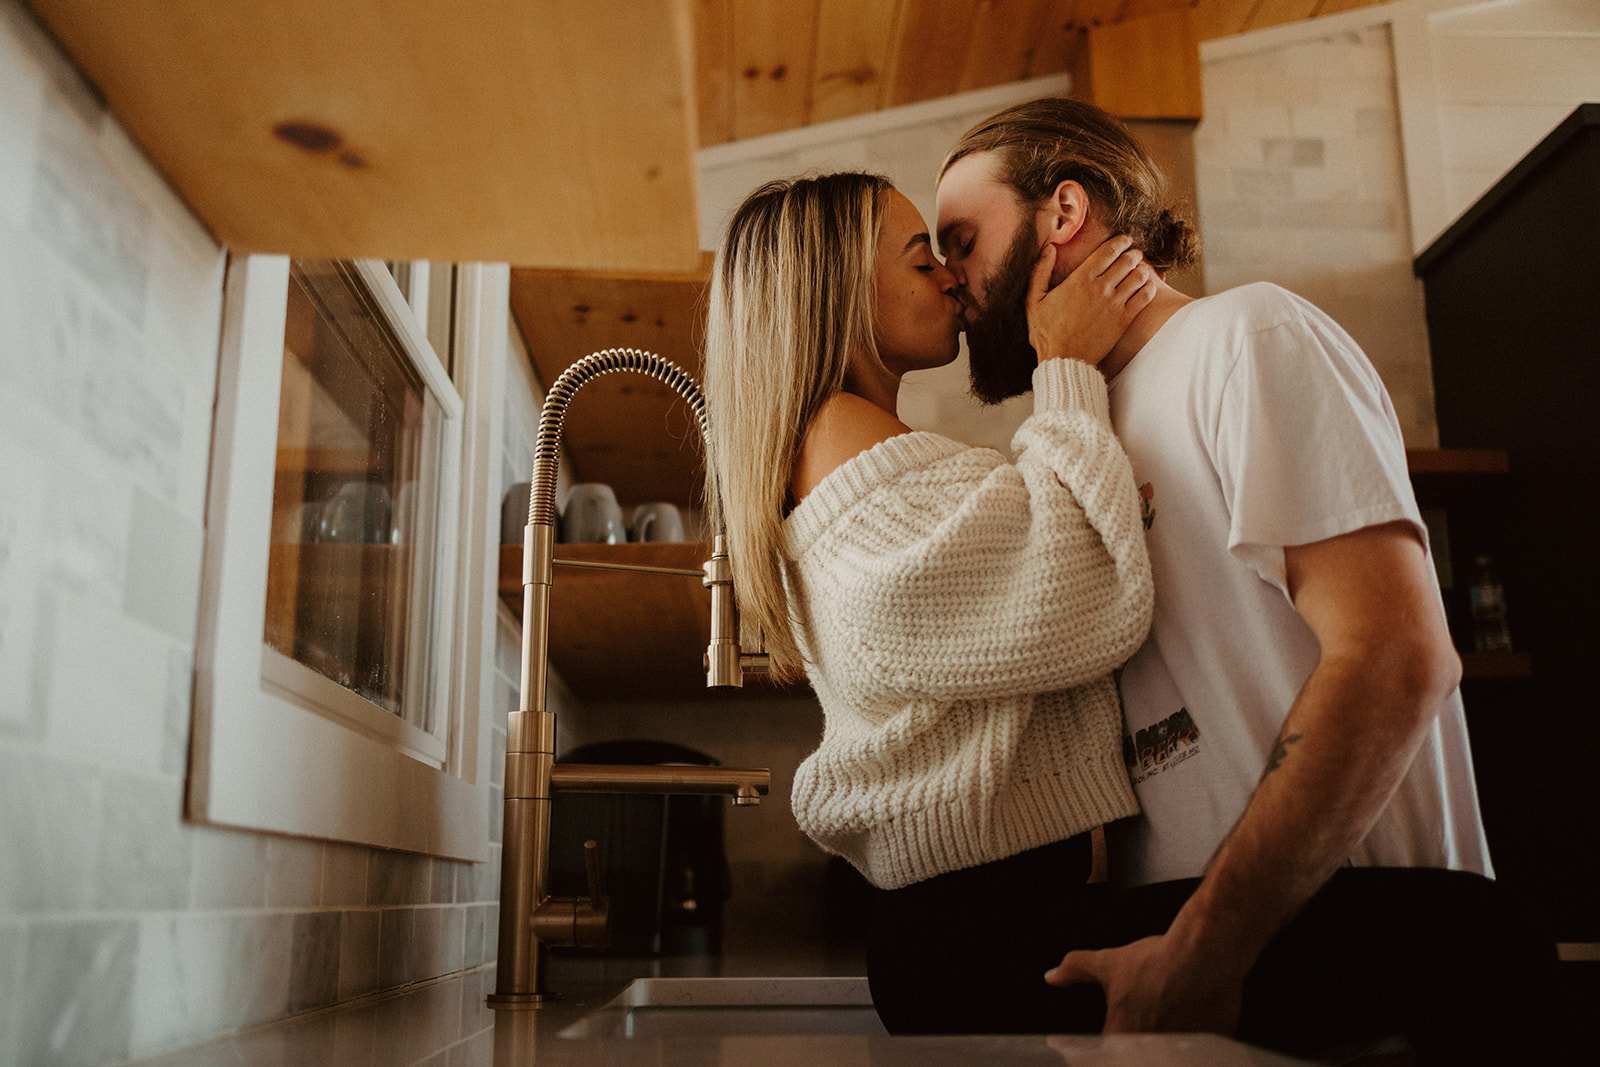 the couple kissing in the kitchen